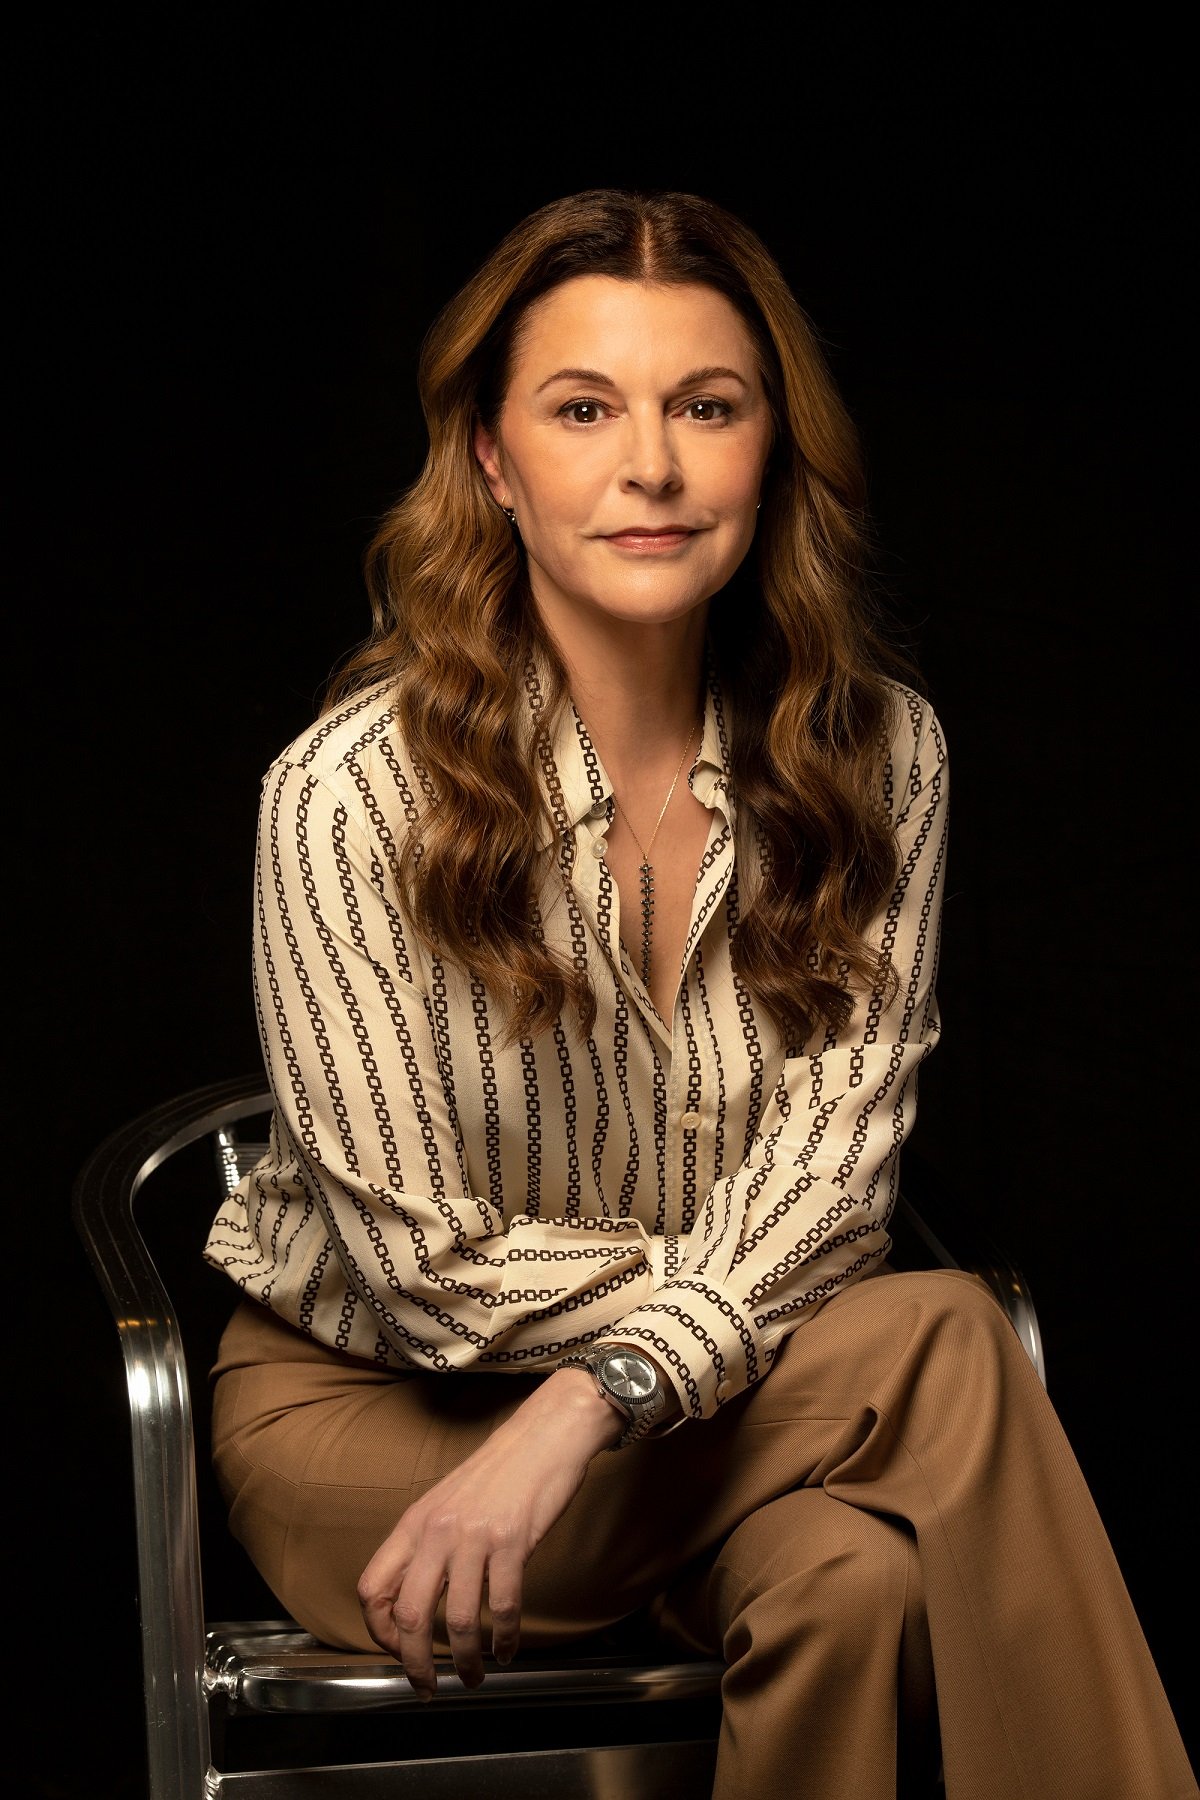 Jane Leeves portraying Dr. Kit Voss in "The Resident" in September 2021. | Source: Getty Images